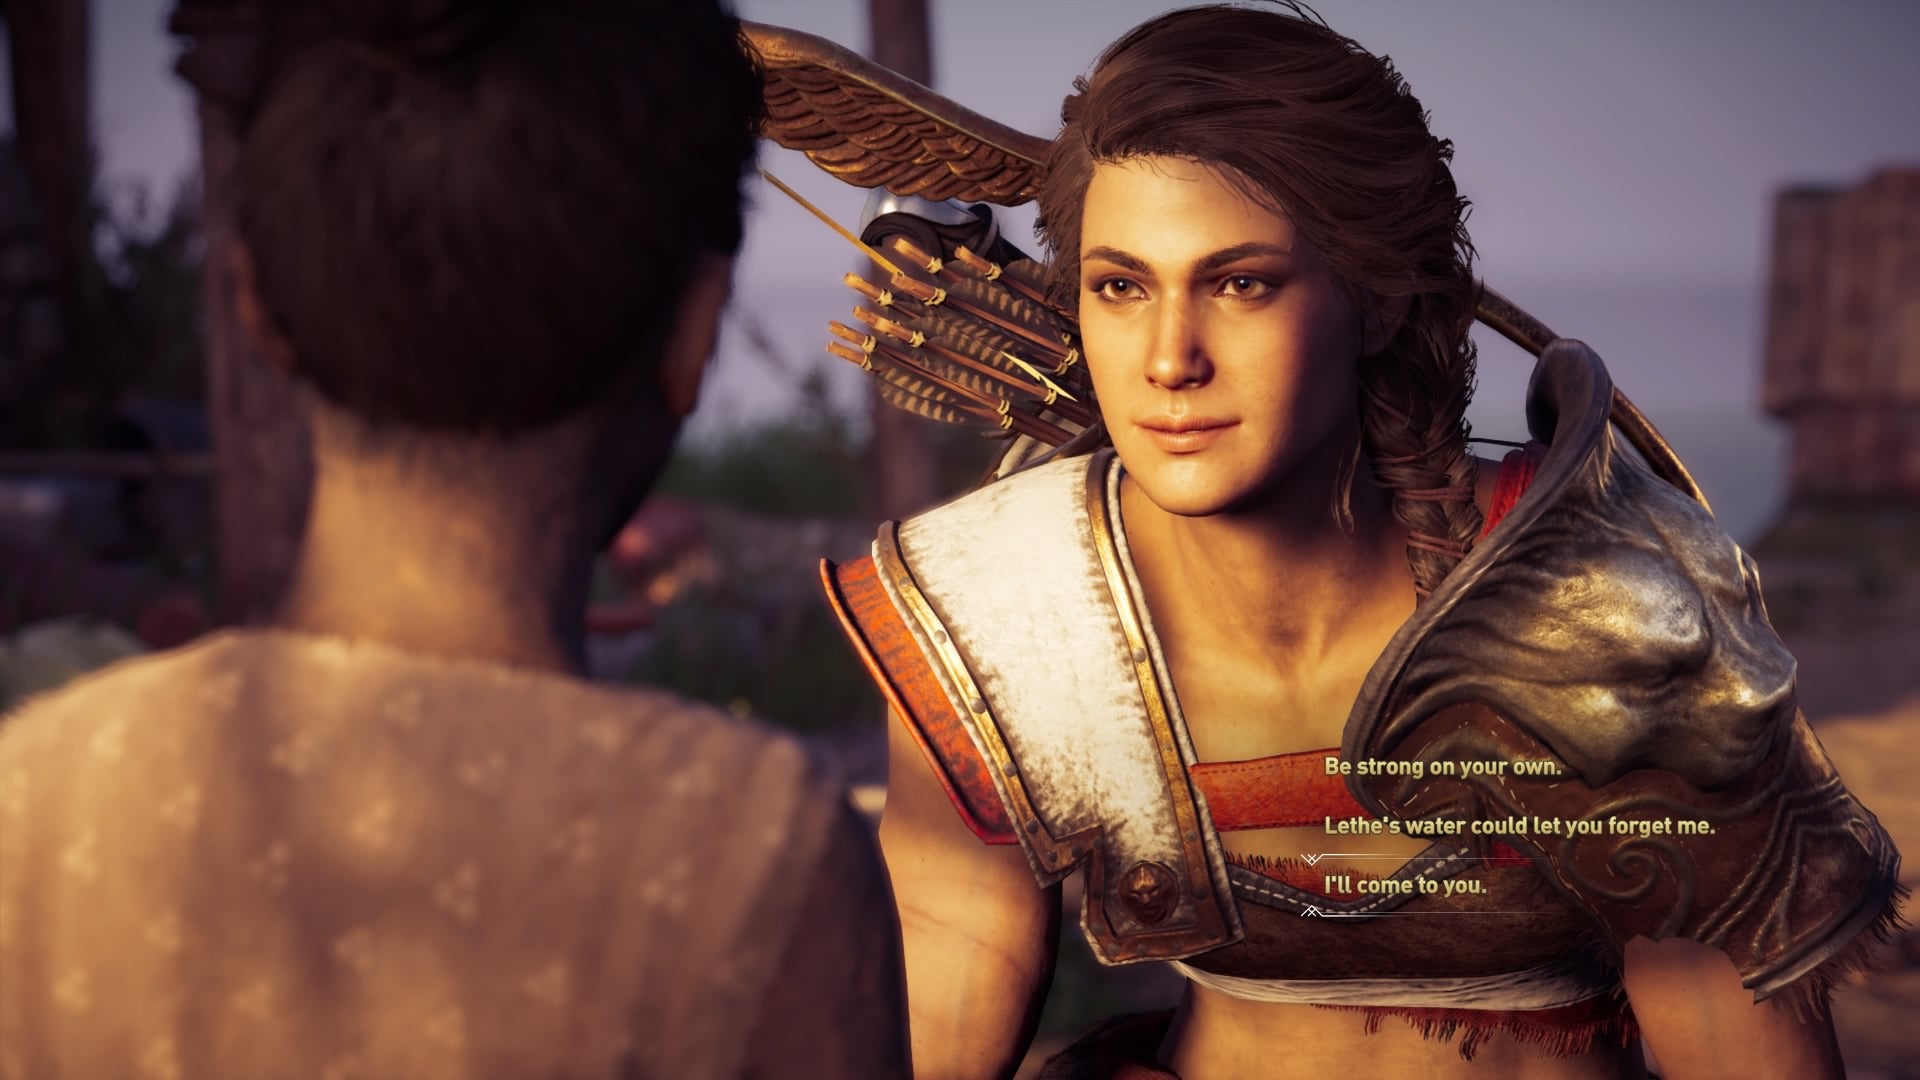 Image for Kassandra was supposed to be the lead in Assassin's Creed Odyssey, but Ubisoft said "women don't sell"